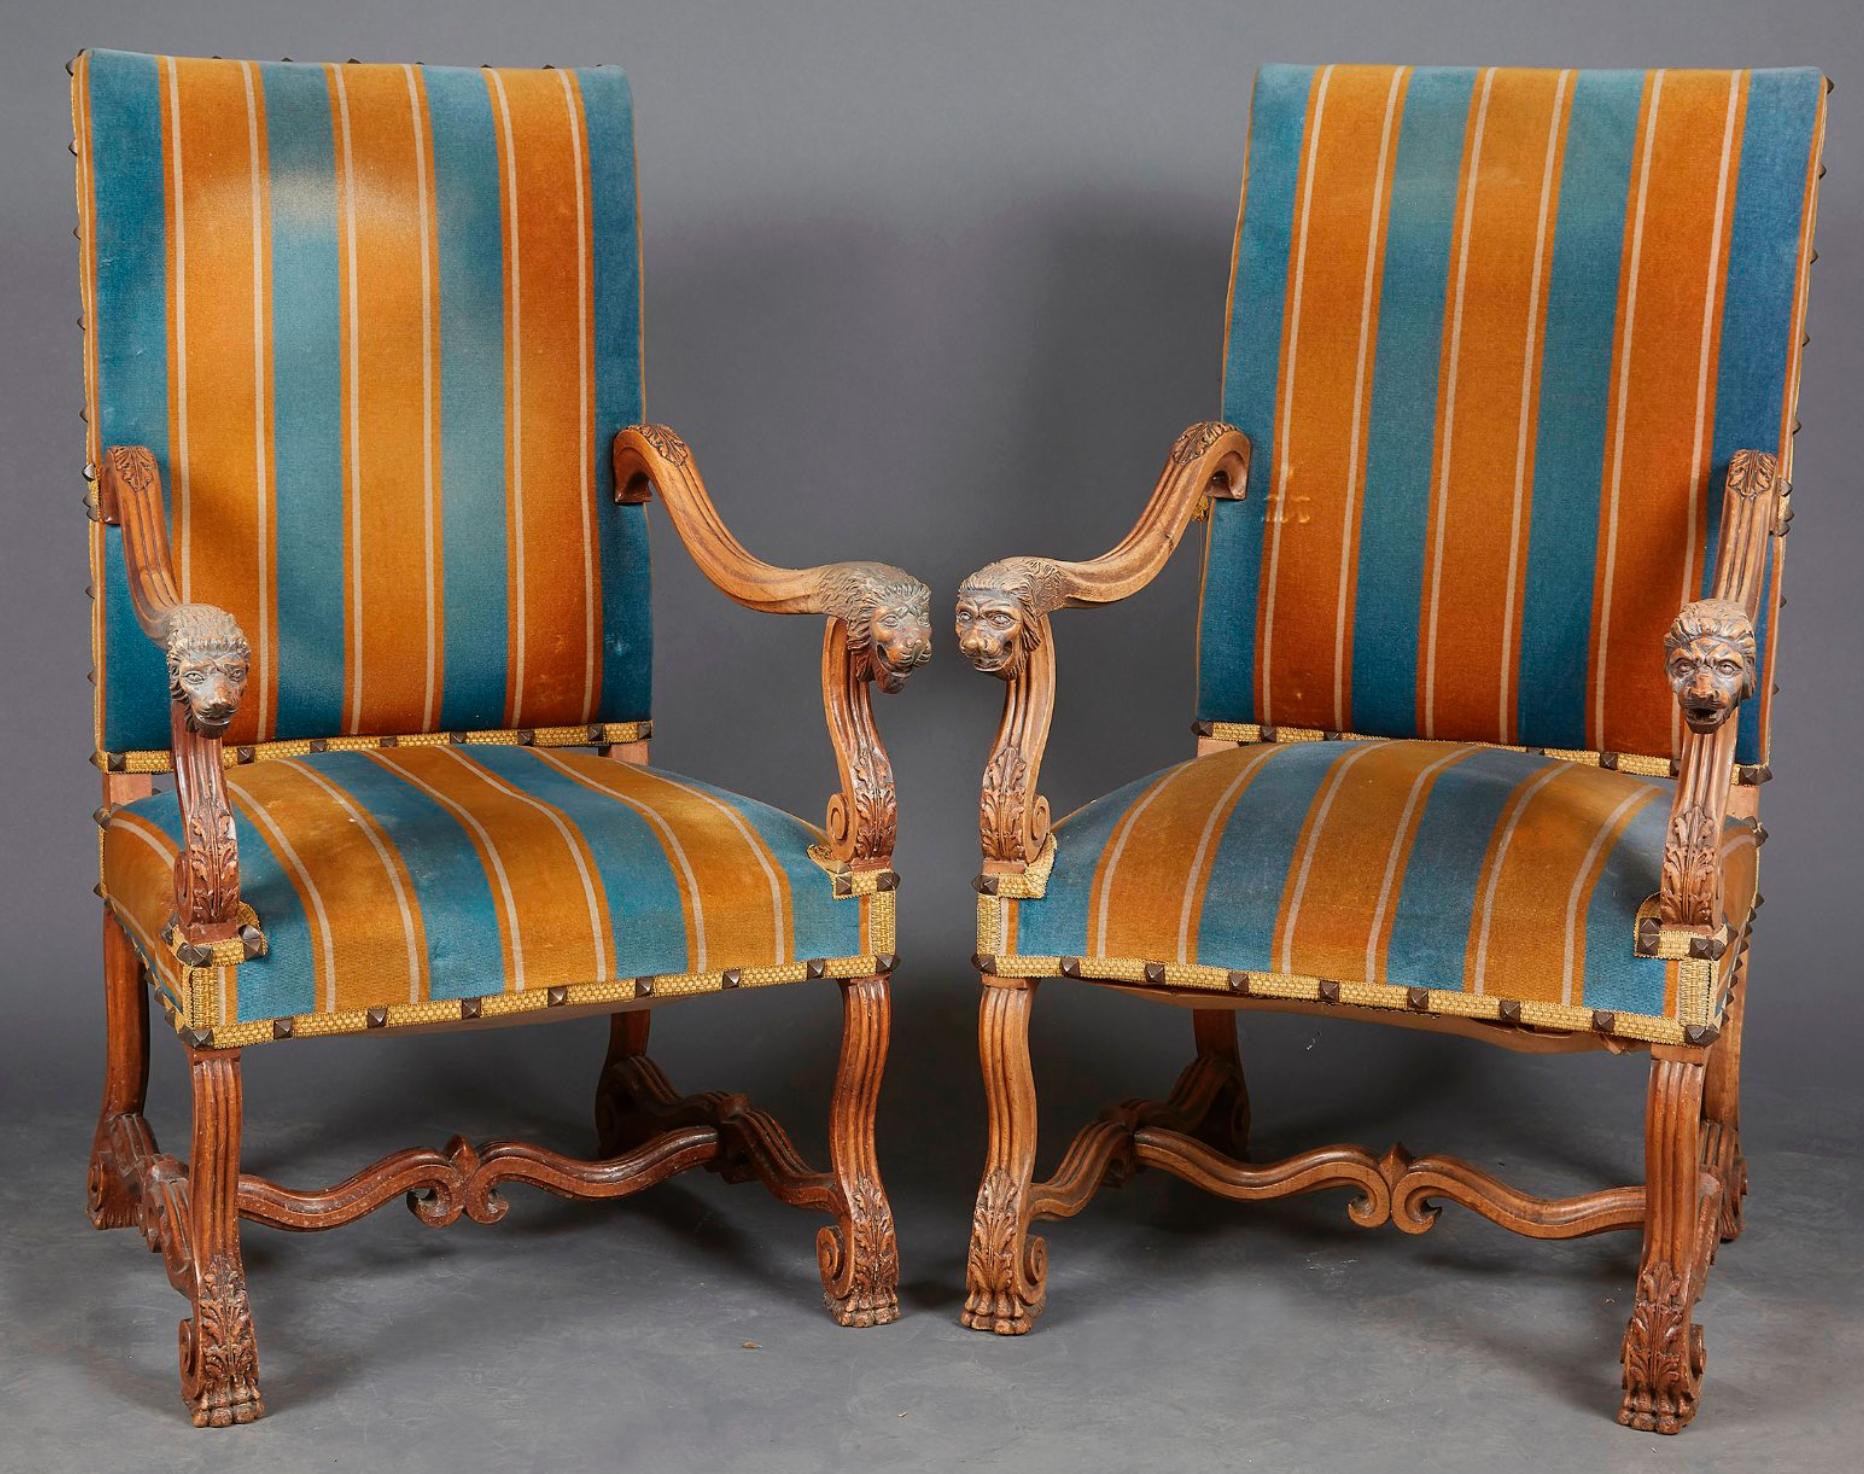 19th century French pair of large hand-carved armchairs made of oak decorated with lion heads e feet, with velvet upholstery.
France, circa 1870.